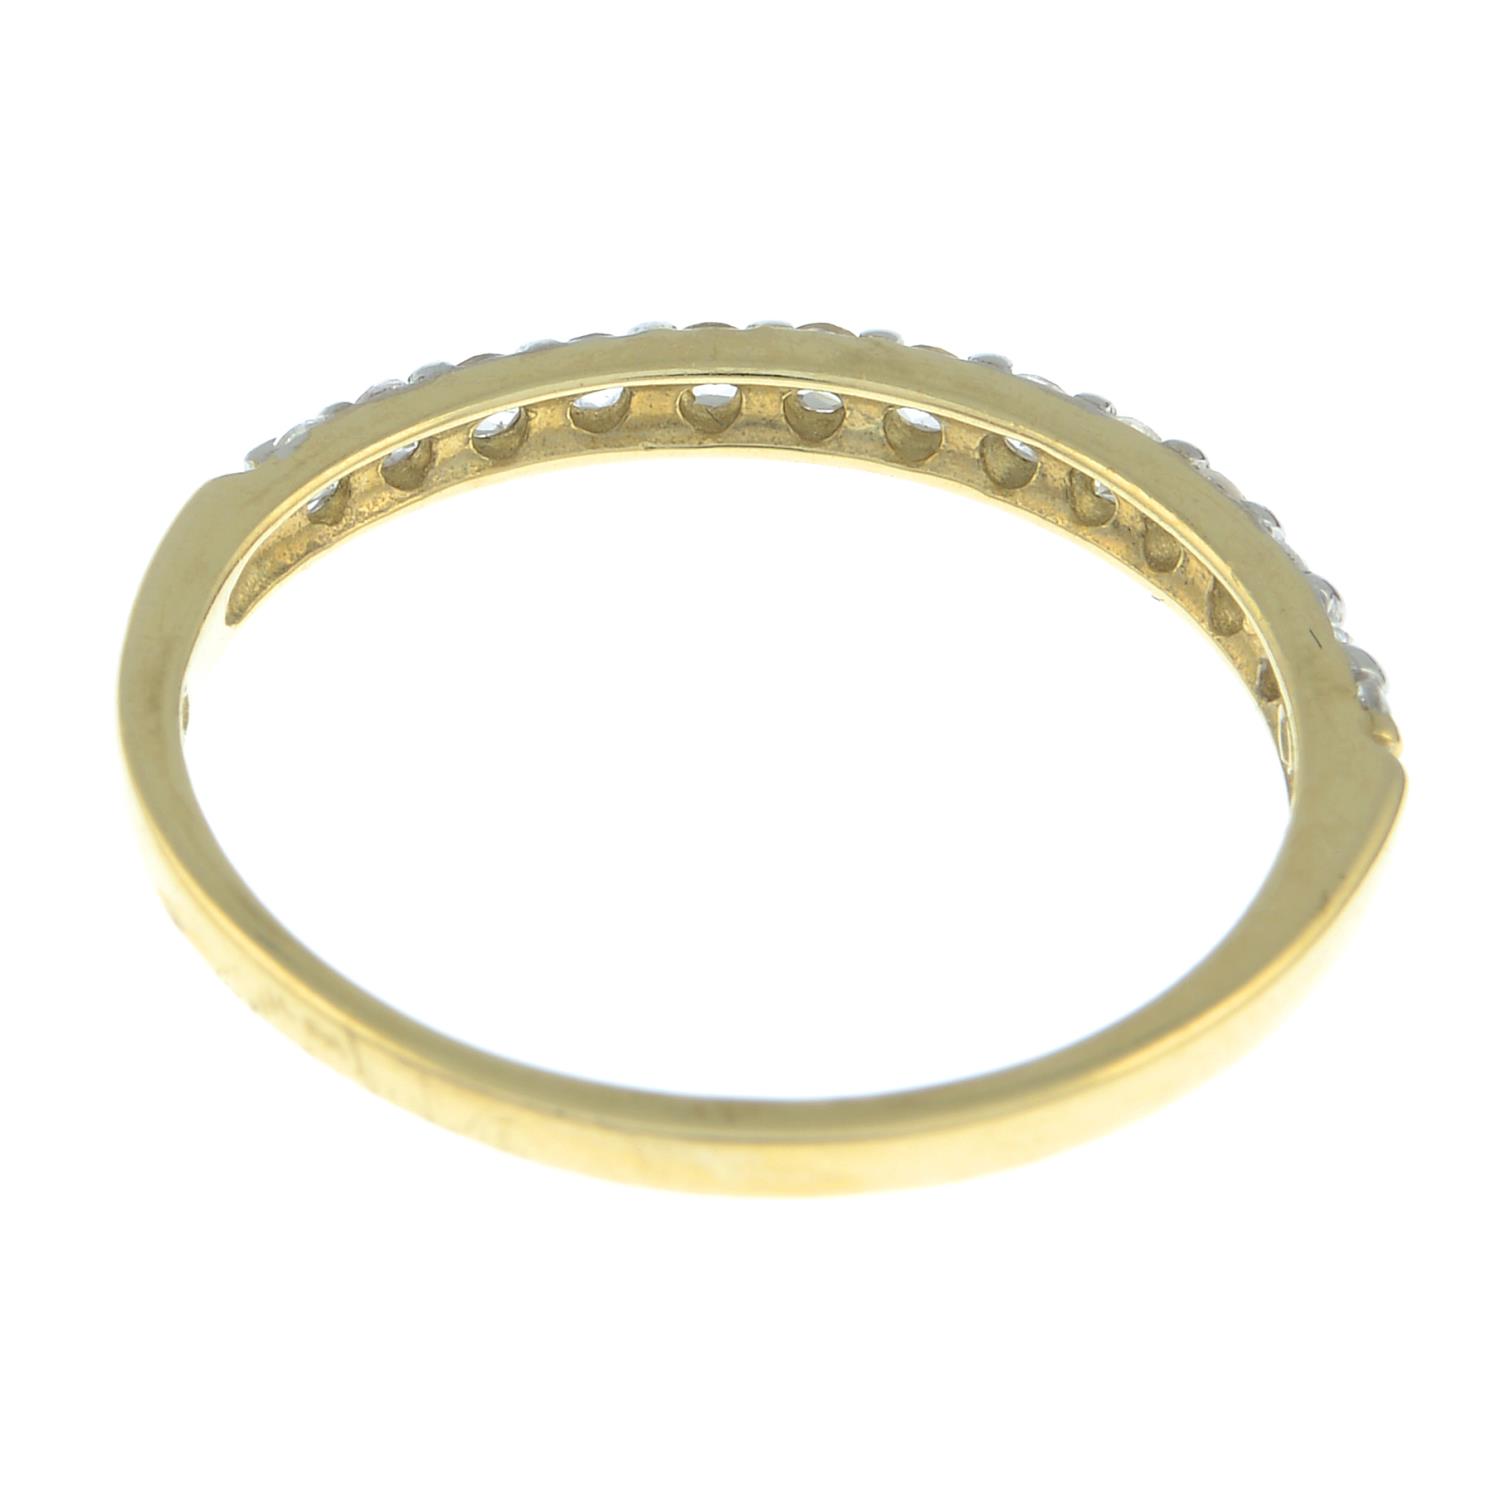 Seven 9ct gold white sapphire and colourless zircon half eternity rings.Hallmarks for 9ct gold. - Image 3 of 4